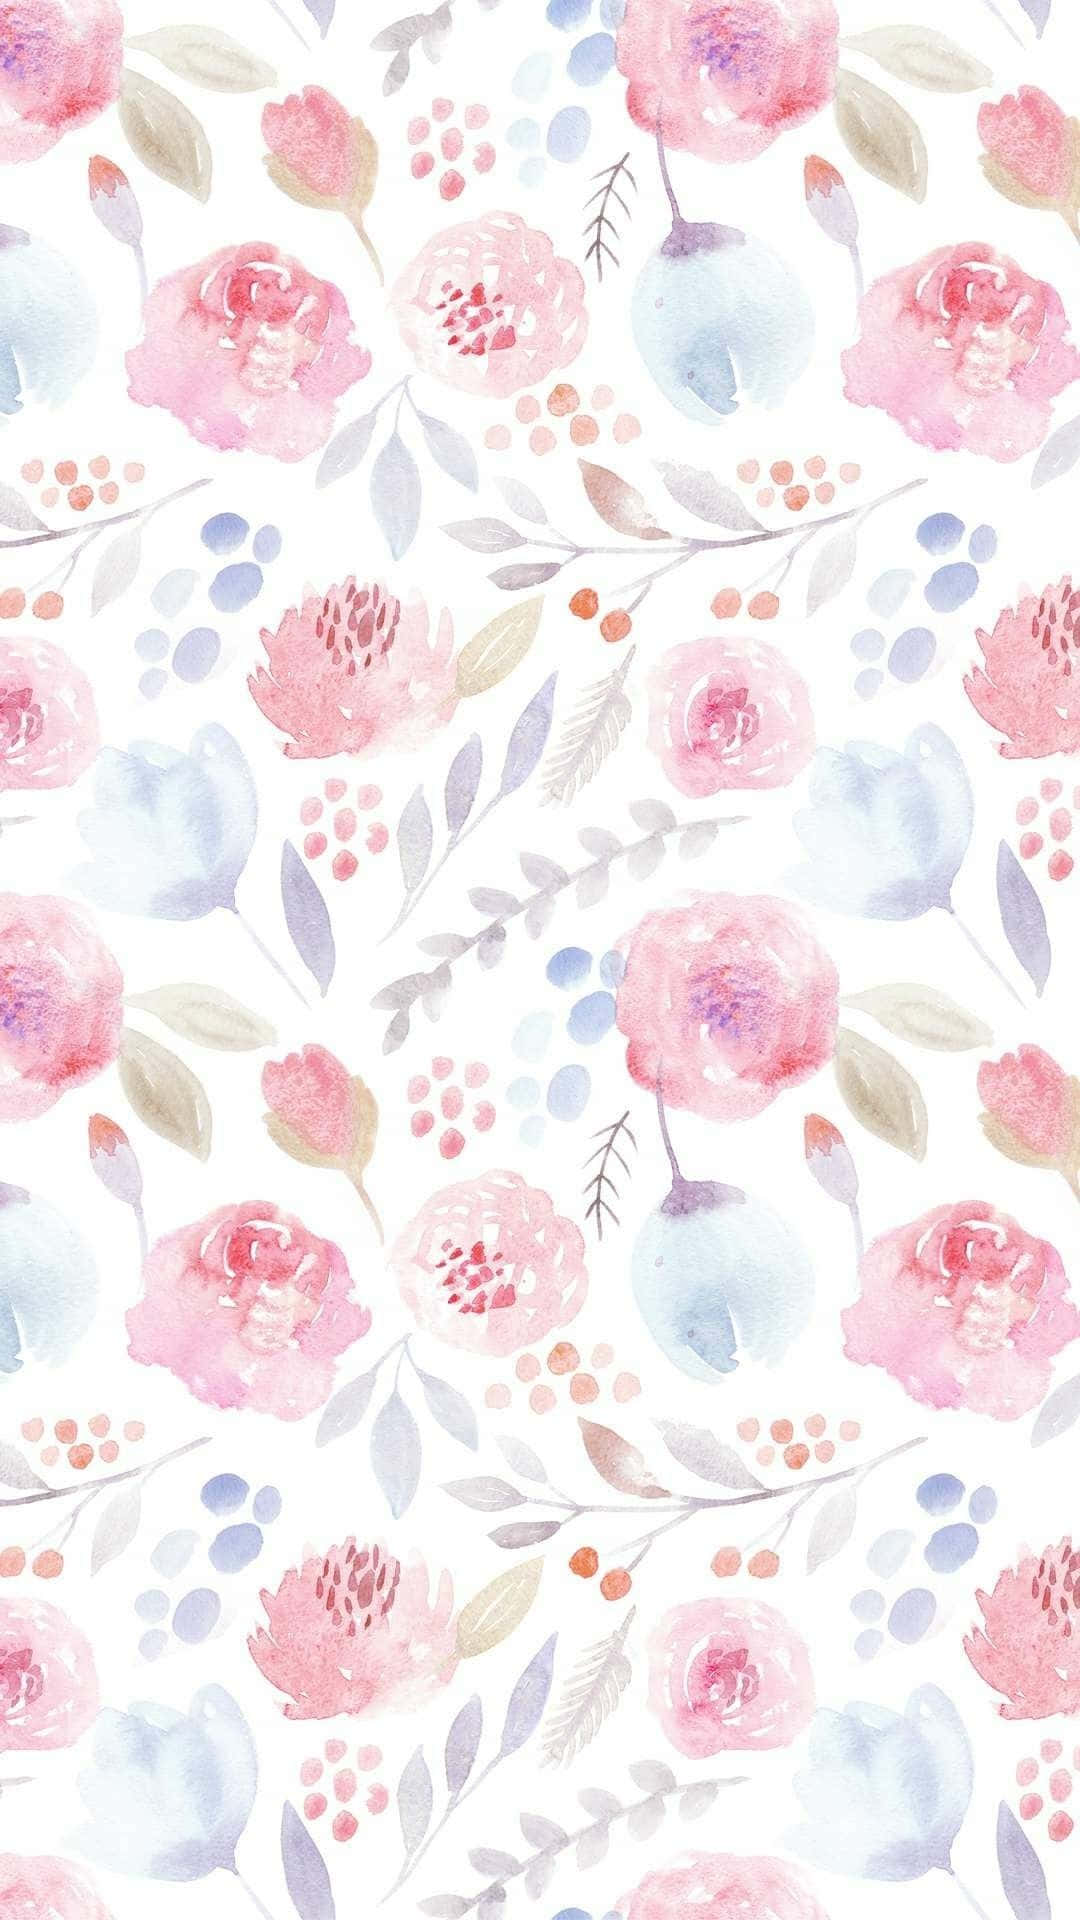 A Watercolor Floral Pattern On White